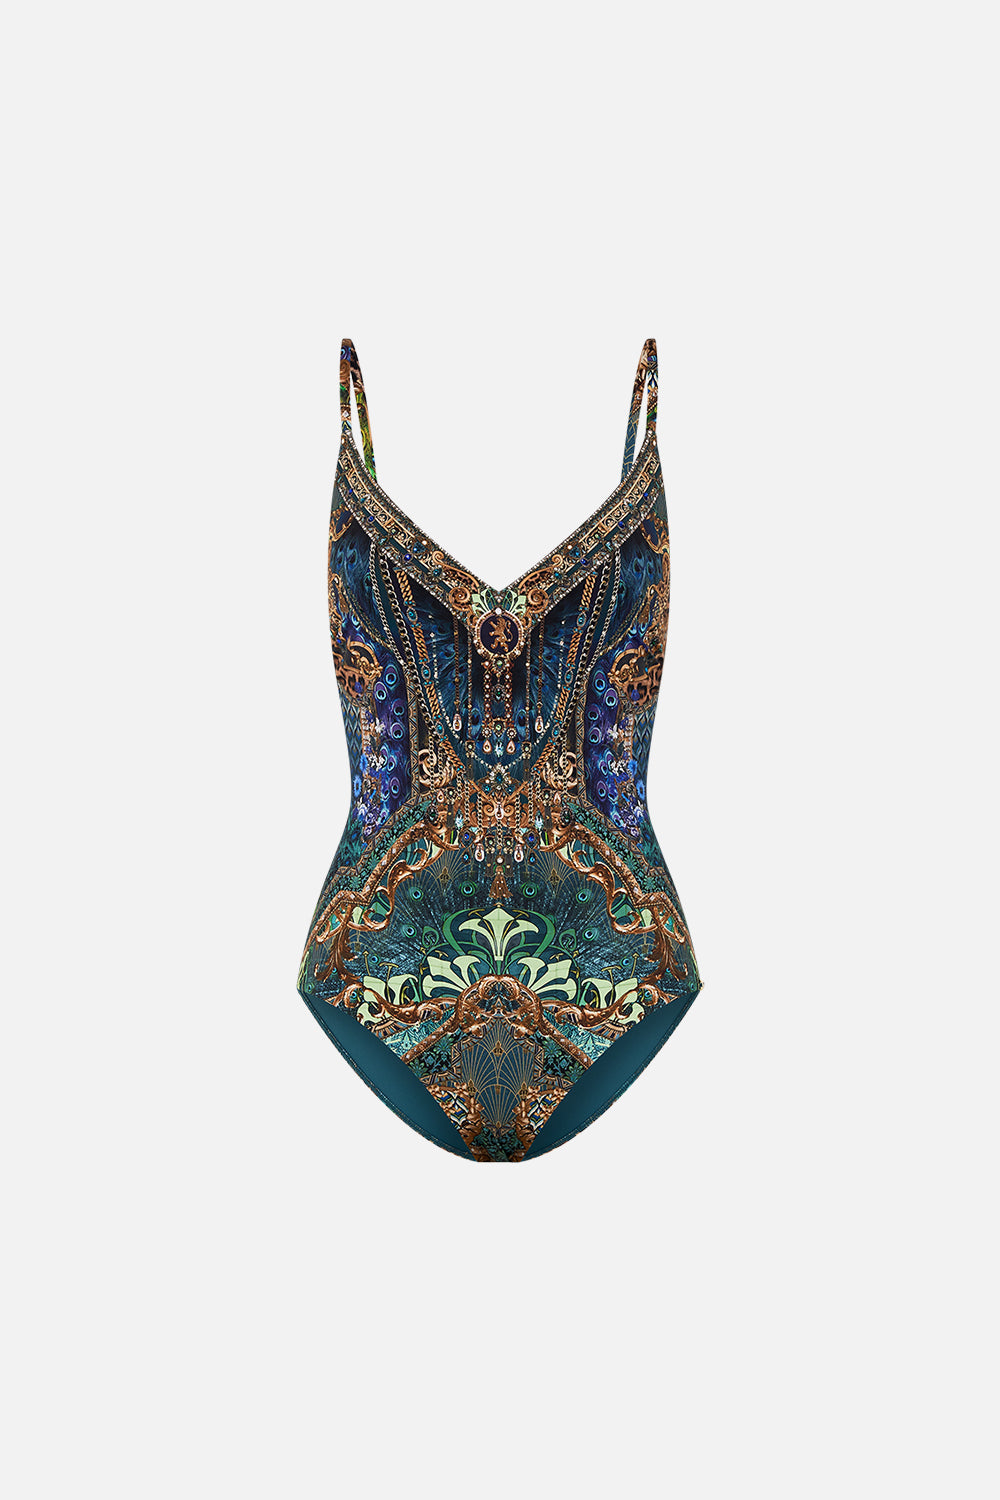 Product view of CAMILLA one piece swimsuit in Fan Dance print